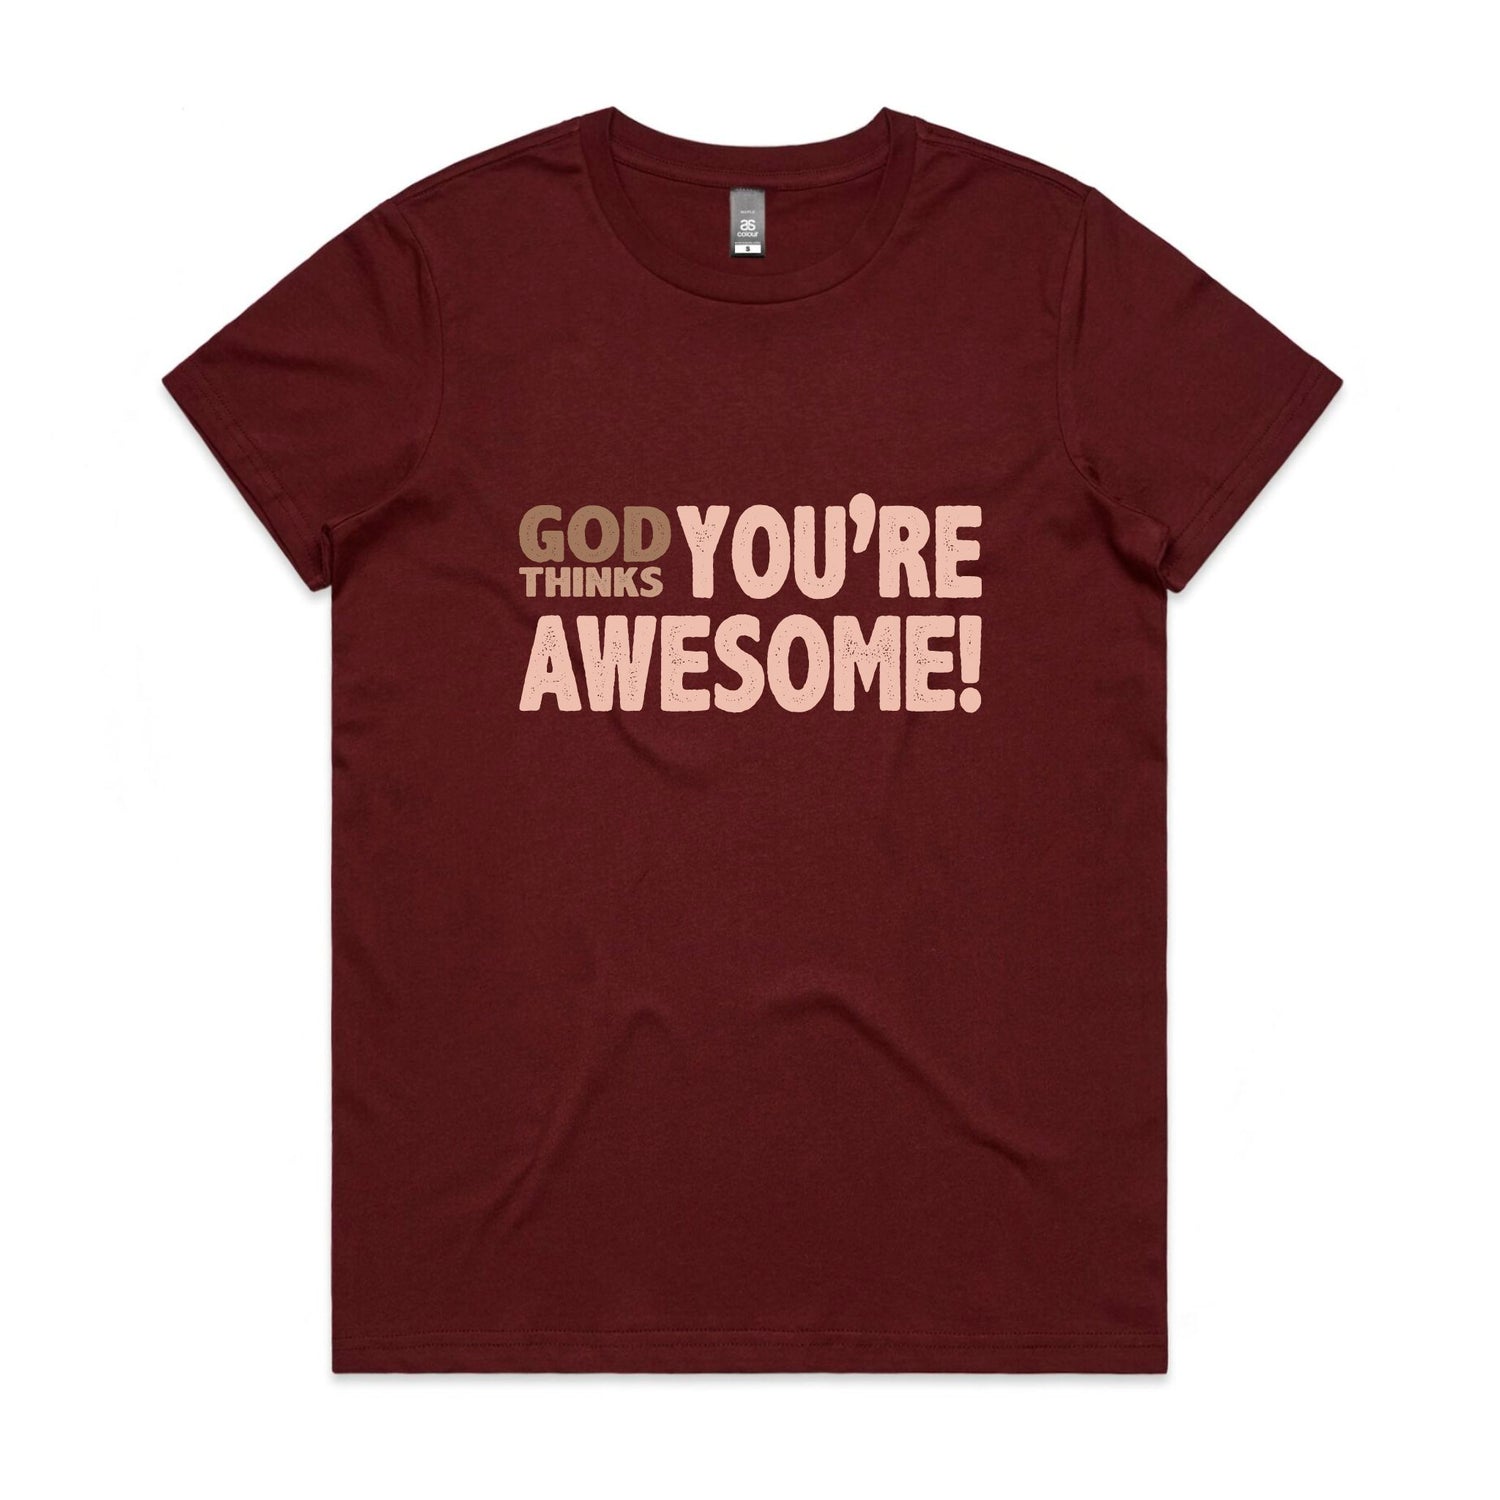 God thinks you're awesome Women's maple tee from God Speaks Back